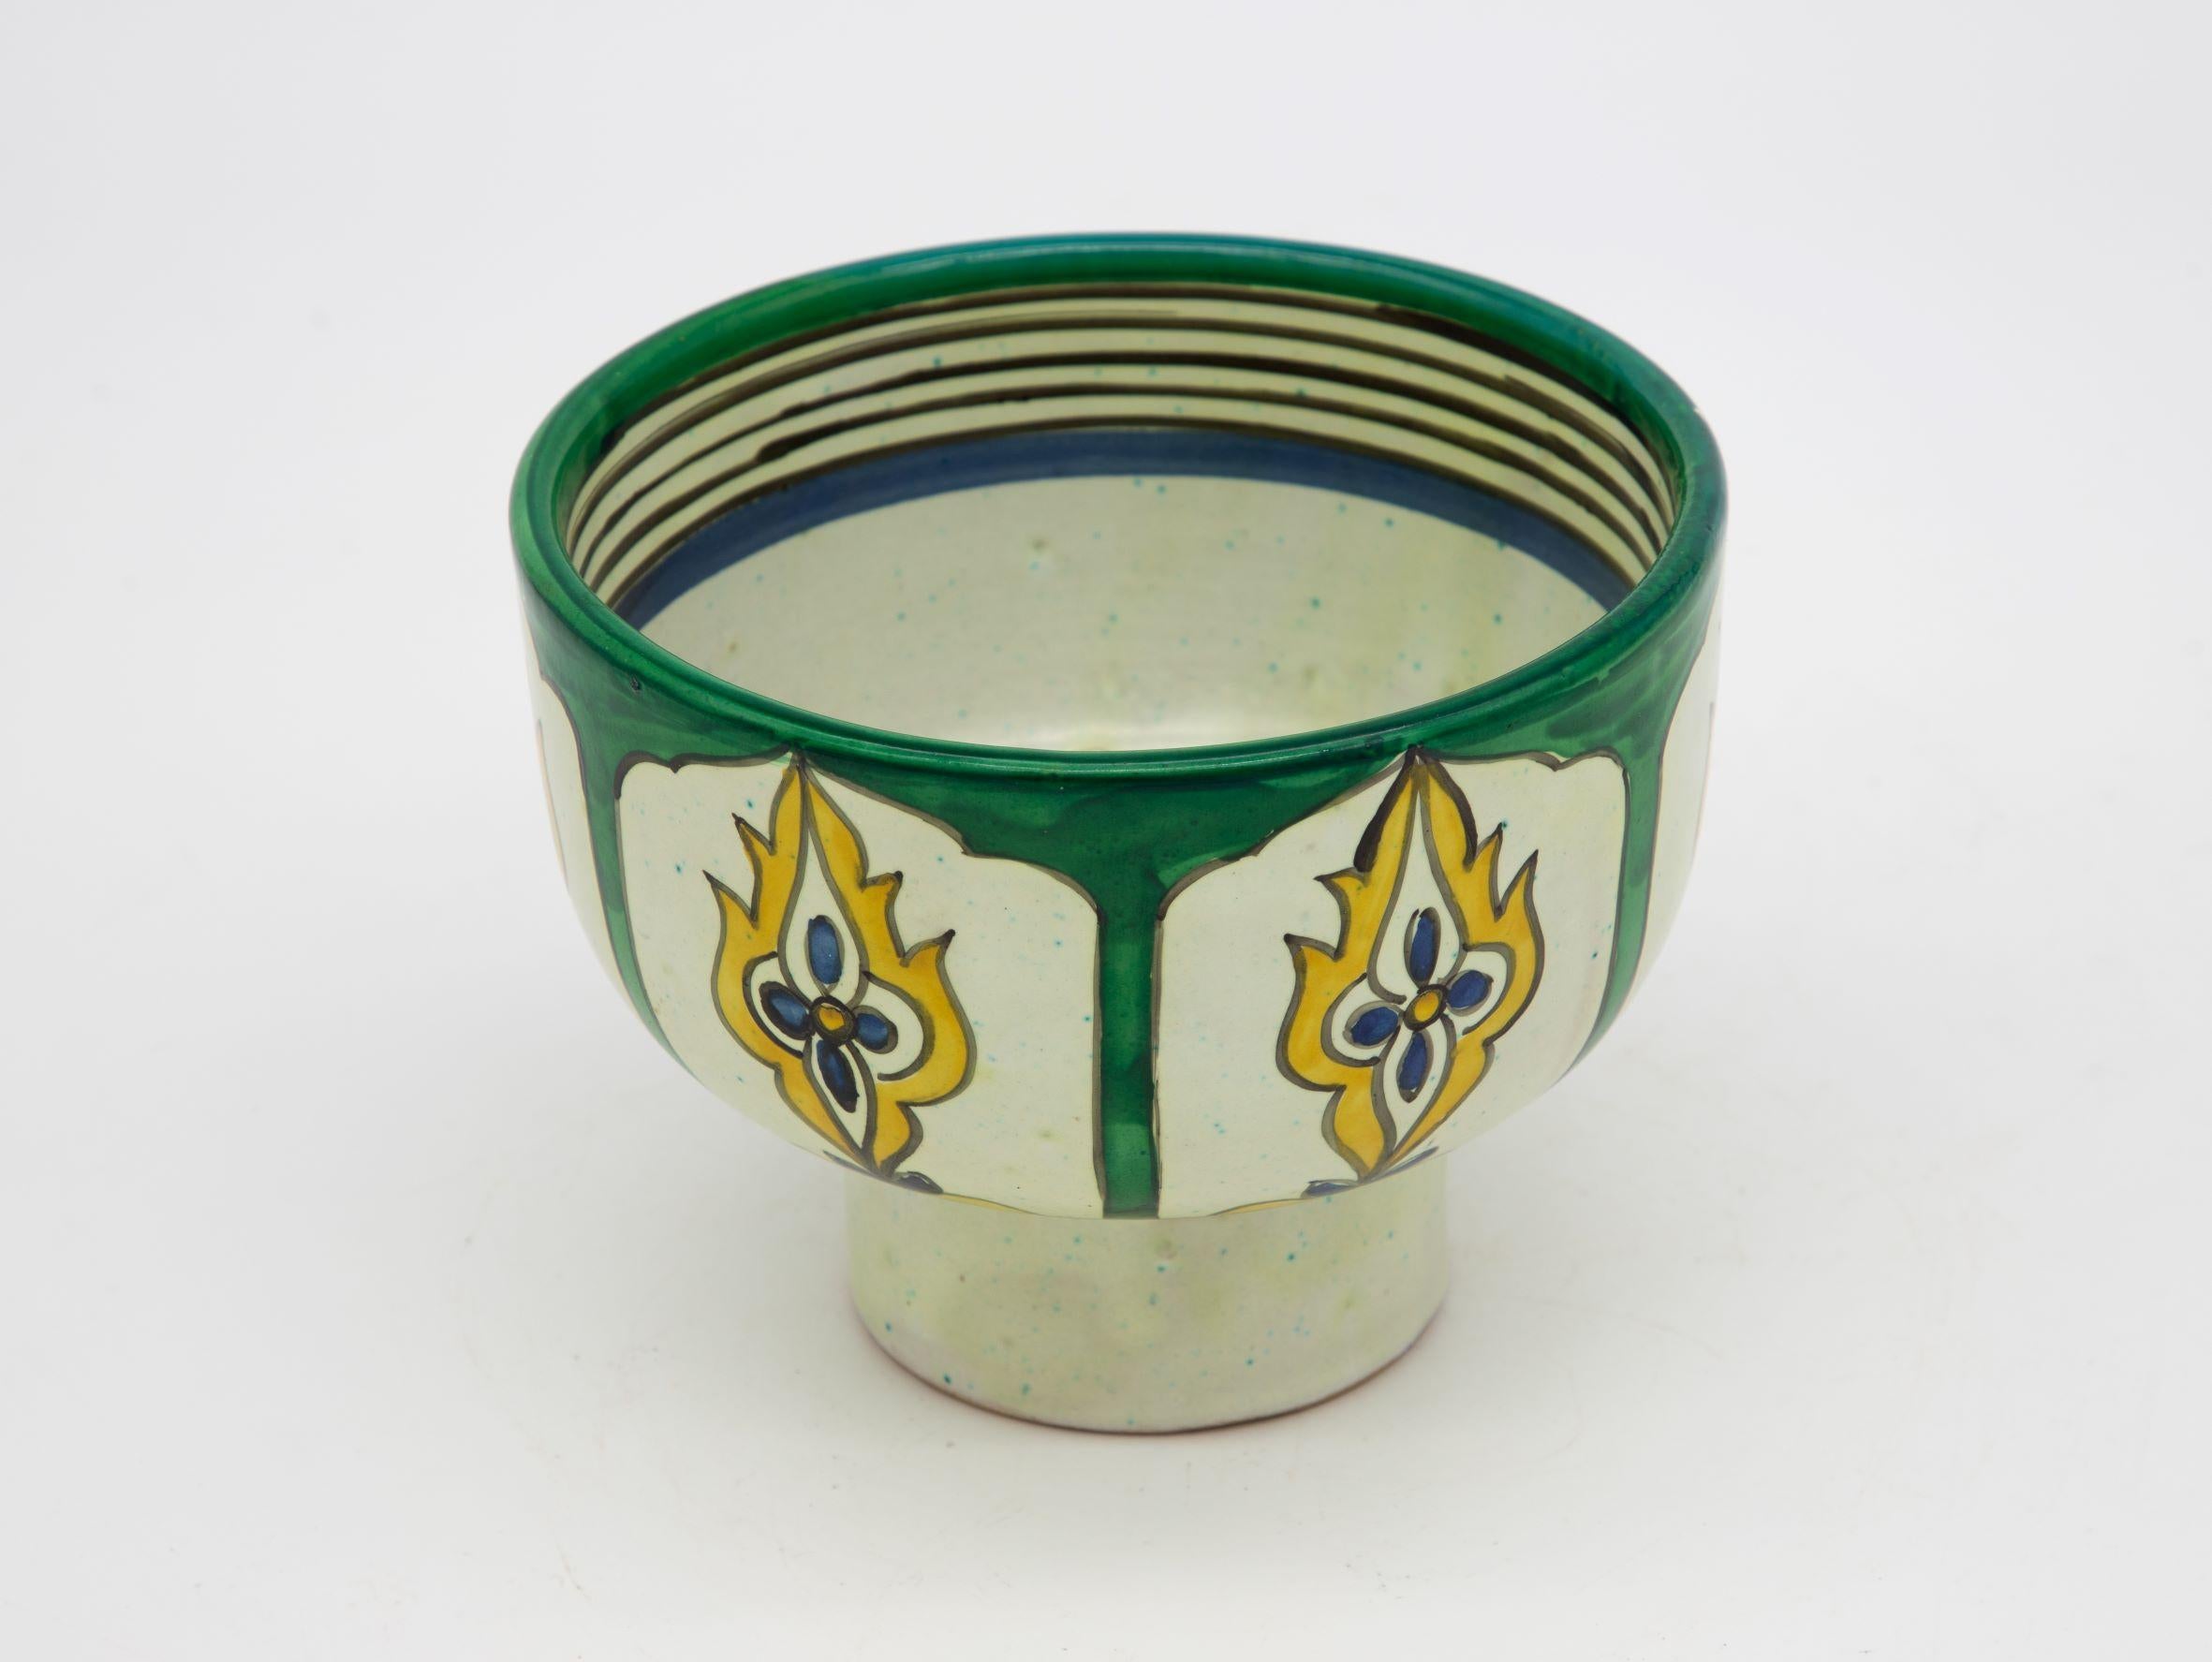 A beautiful handpainted Fes ceramic bowl brightly colored in green, saffron, and blue. This Moroccan Zlafa , Harira pot polychromic ceramic is from Fes , Morocco and was made at the end of the 19th century. Wear consistent with age and use.